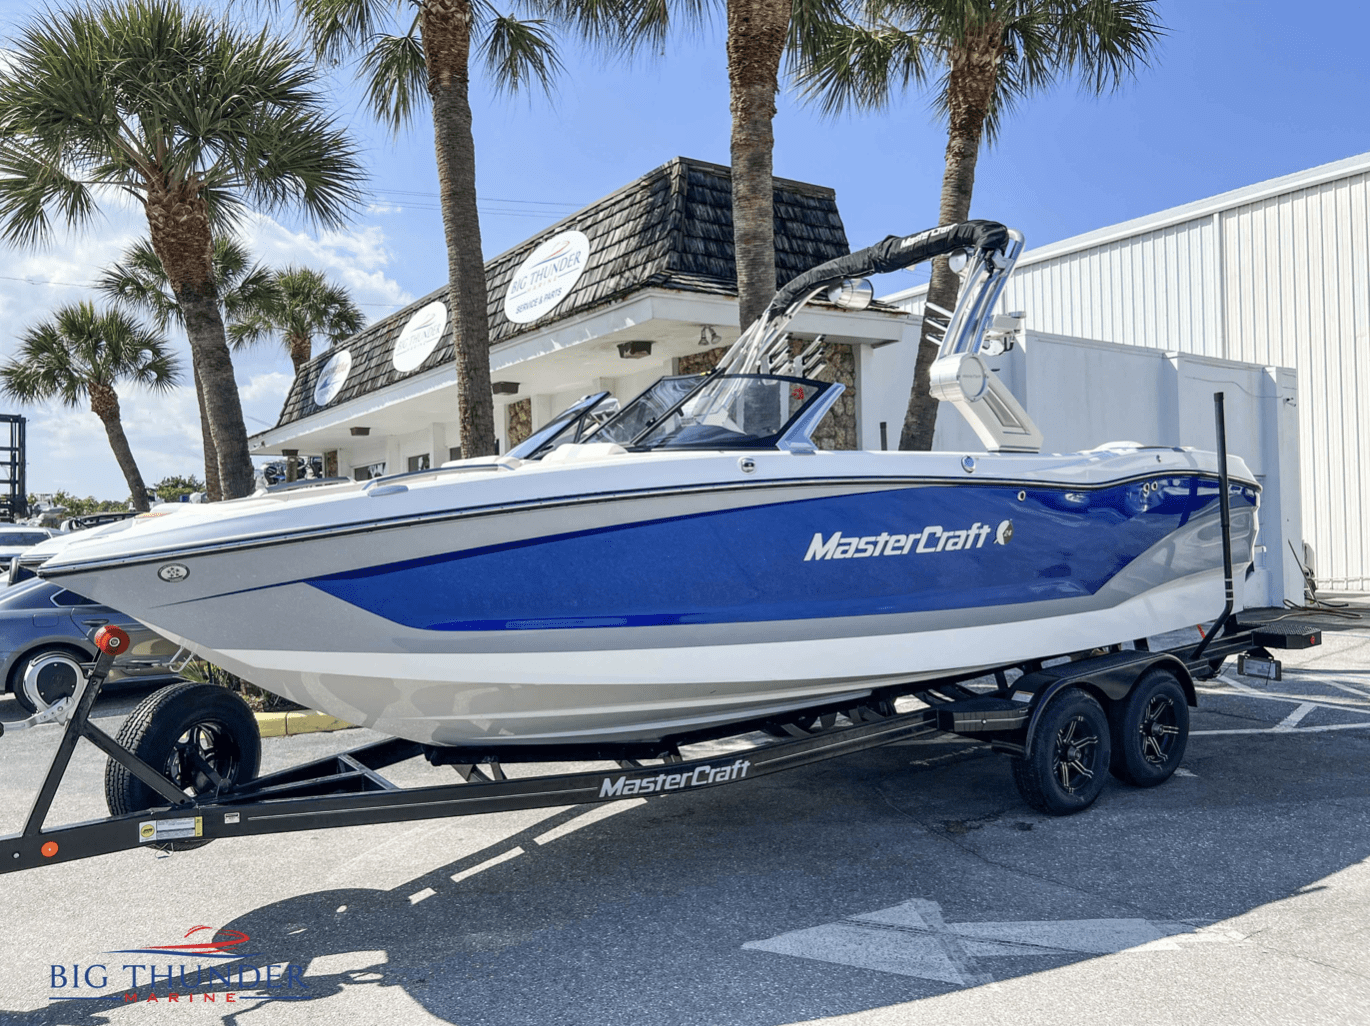 A blue and white boat, a 2023 master craft x24, parked in a parking lot.